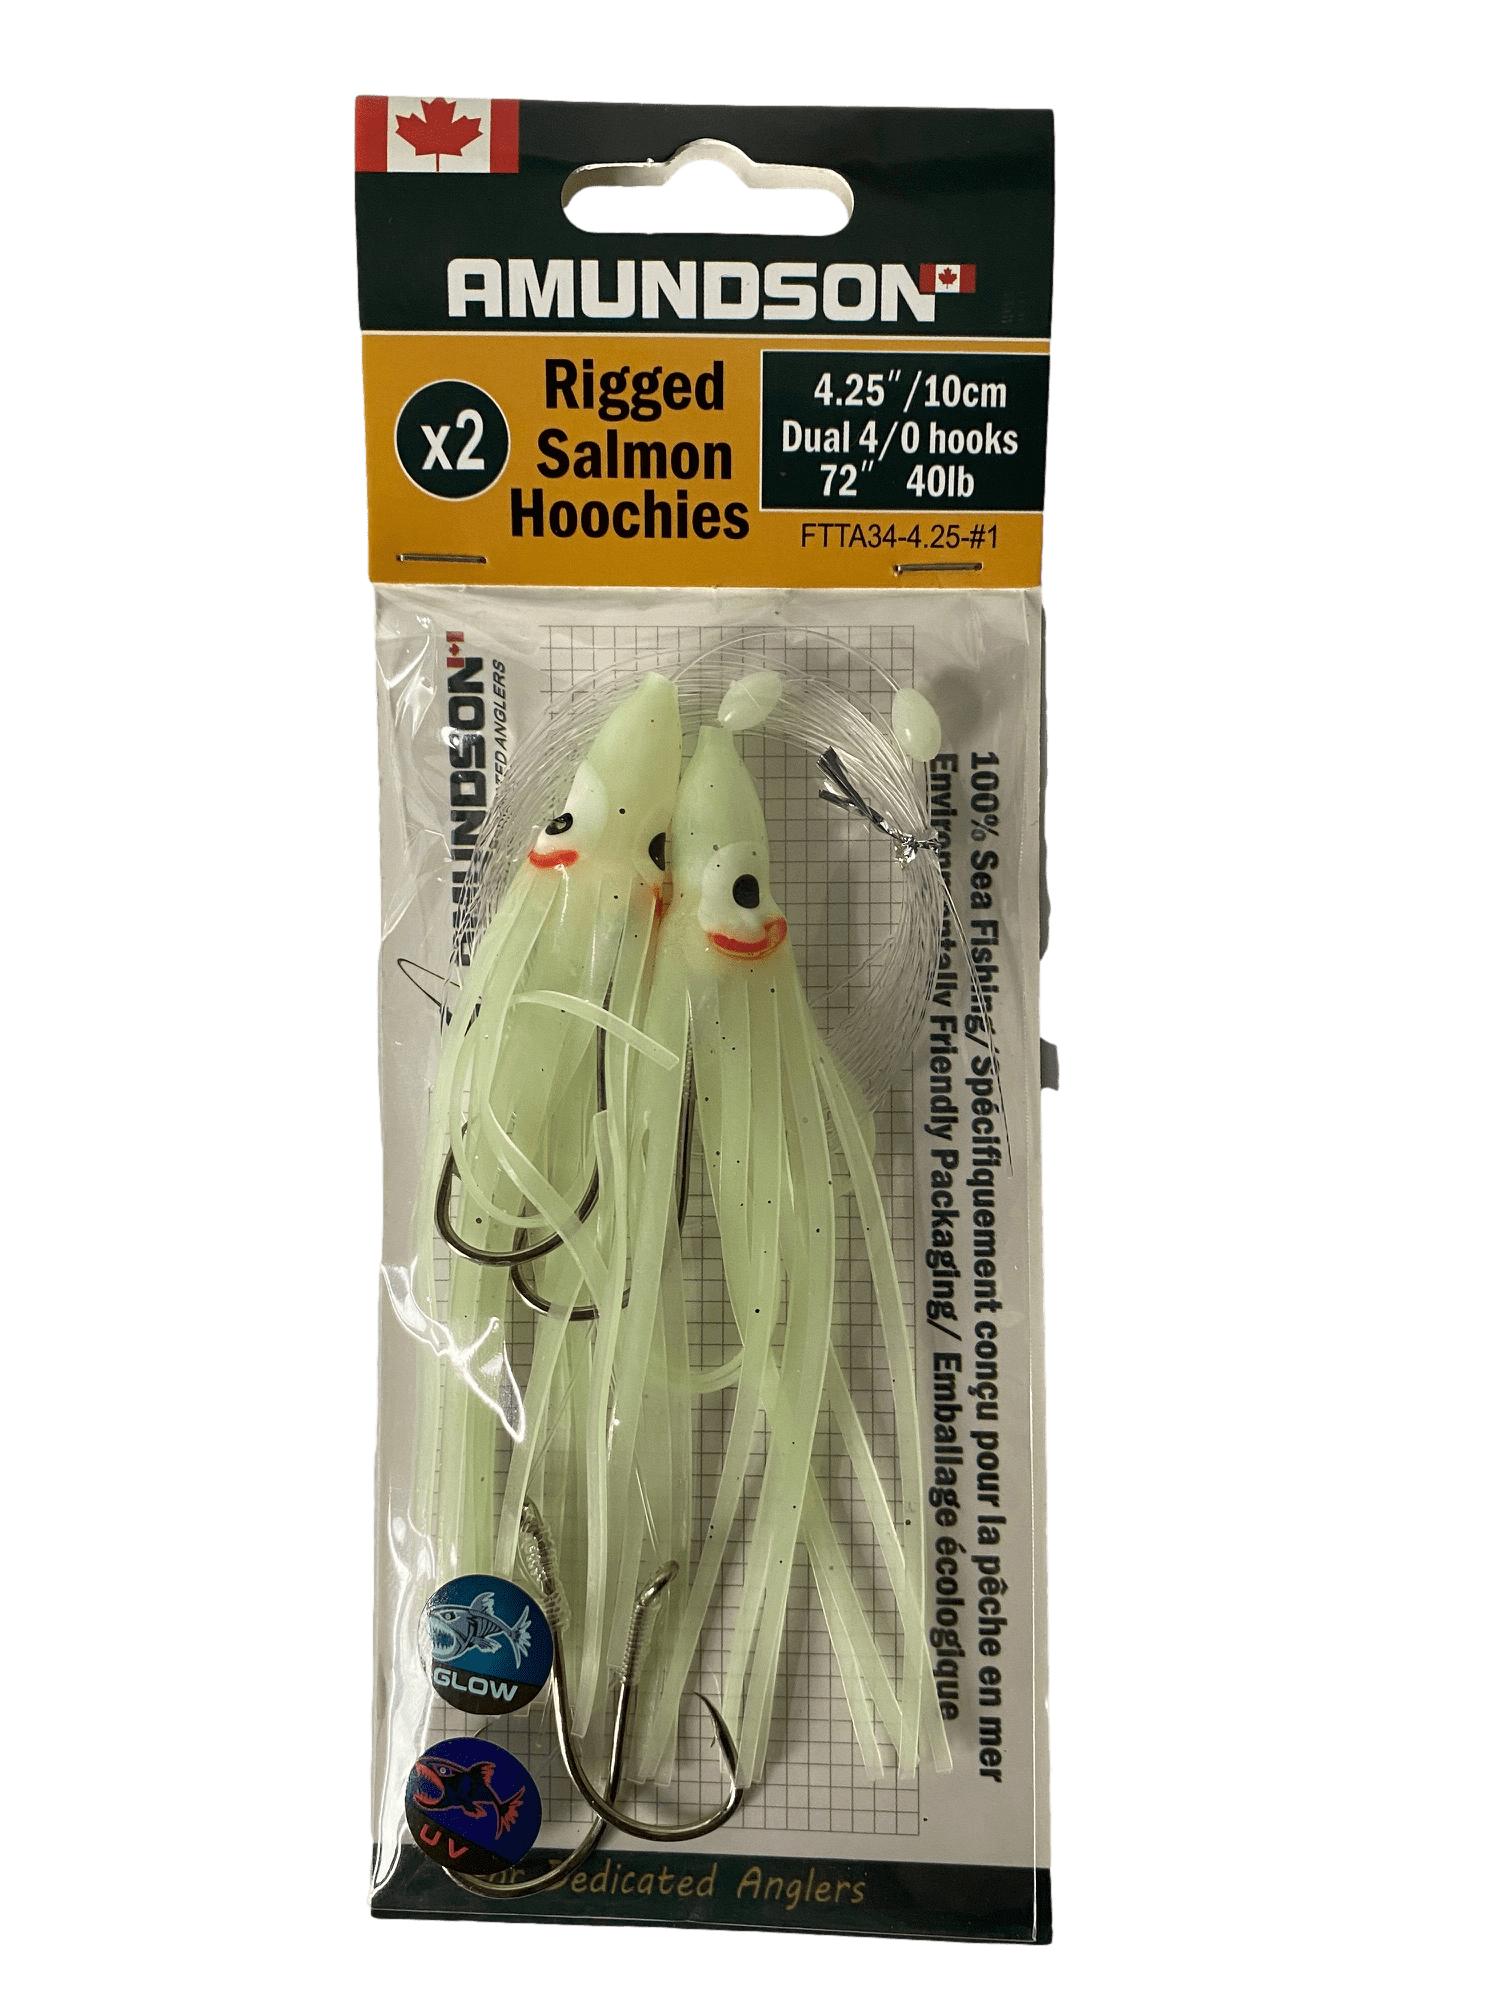 Rigged Salmon Hoochies (2/pack)